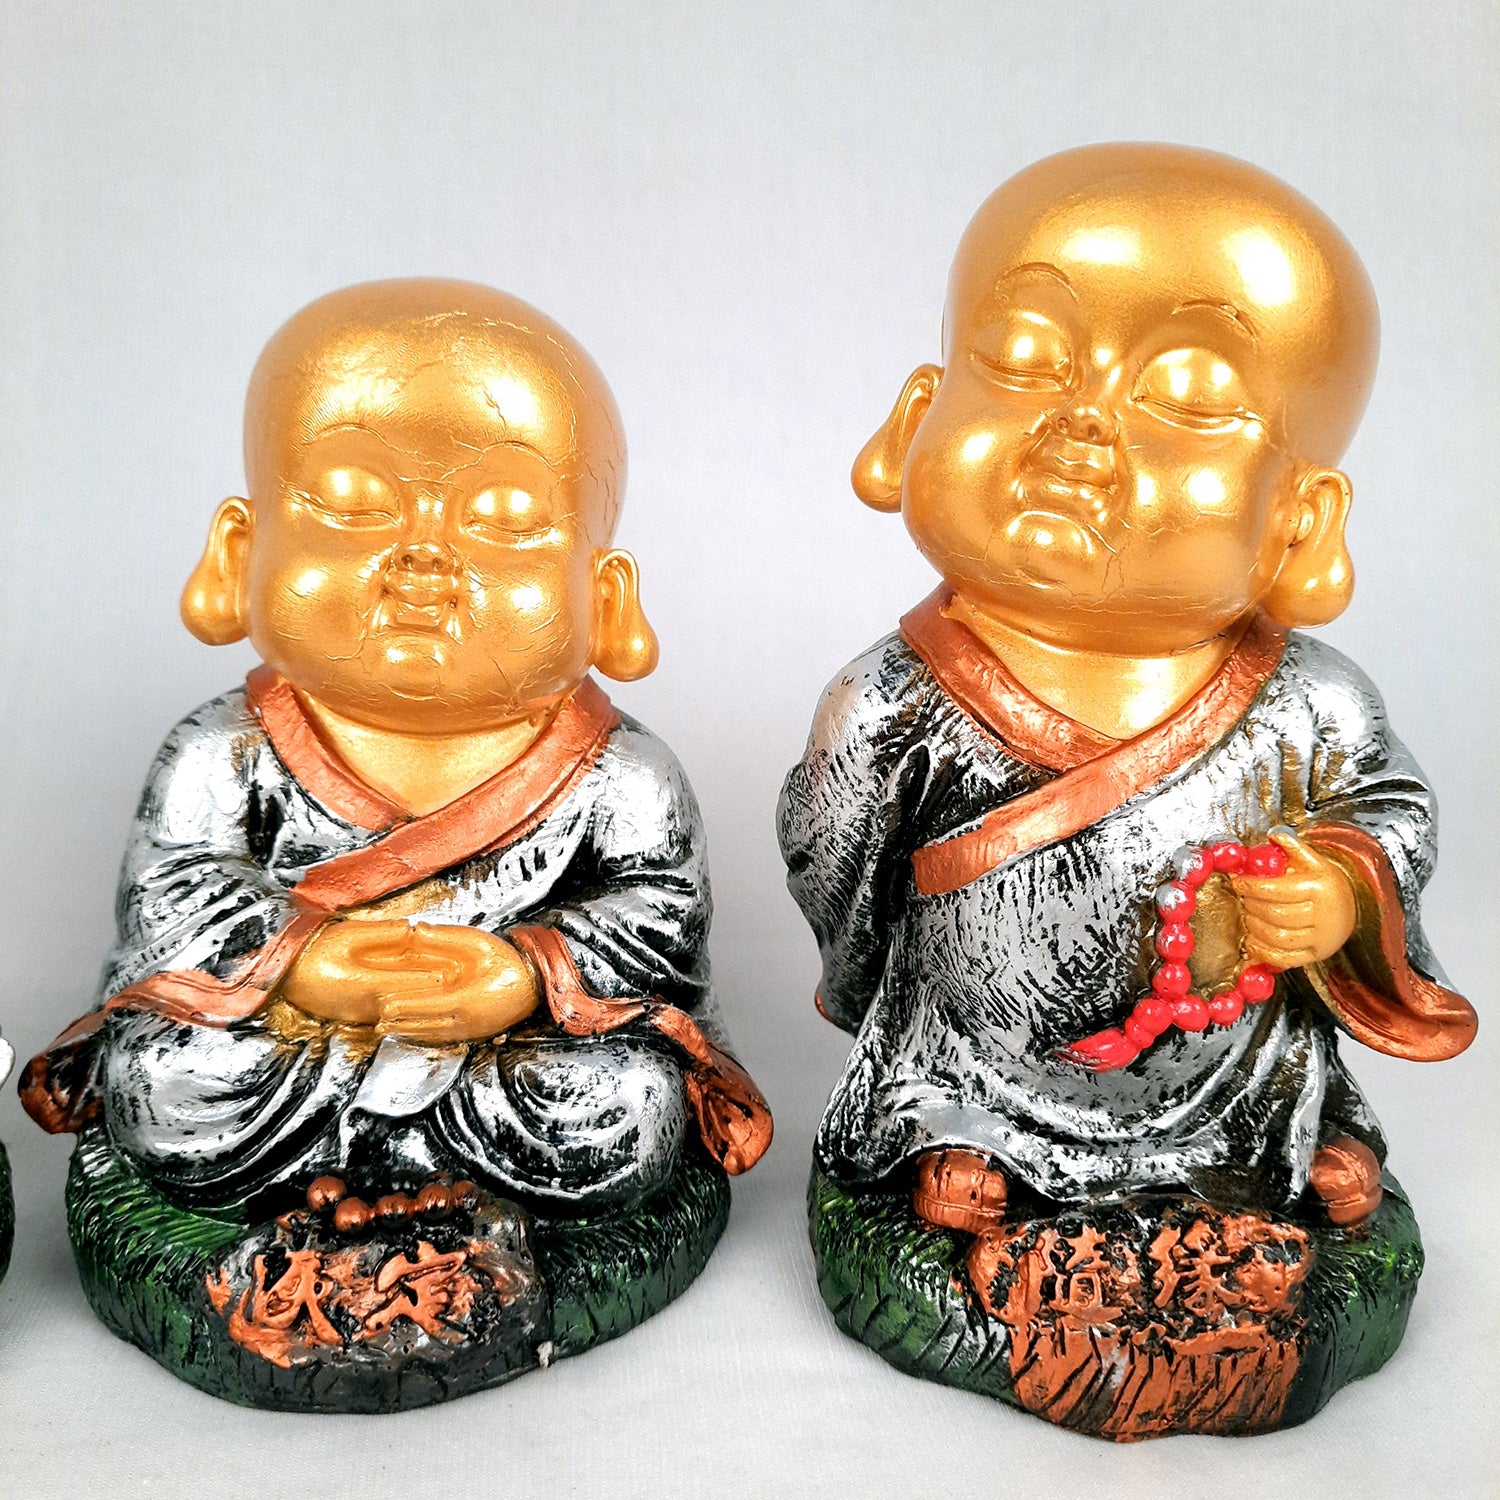 Buddha Baby Monk Showpiece | Feng Shui Child Monk Statue - for Home & Table Decor, Health, Wealth, Office Desk & Gift - Set of 3